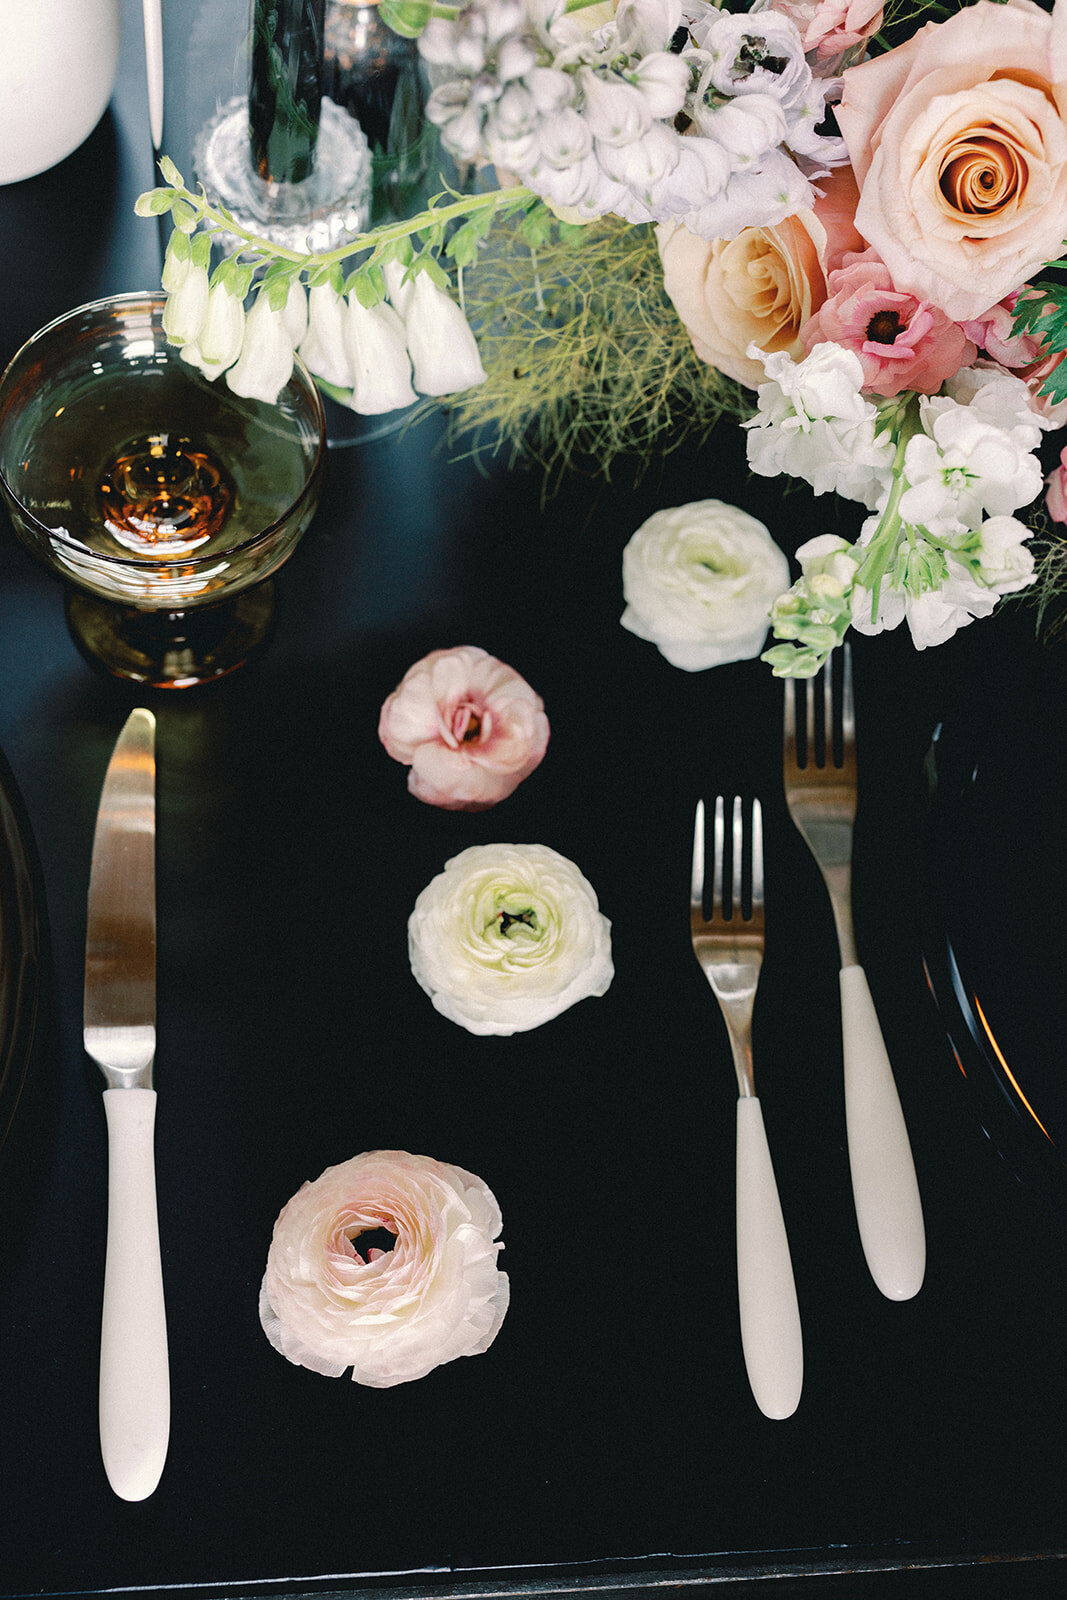 Silverware and pink and white flowers on a black table